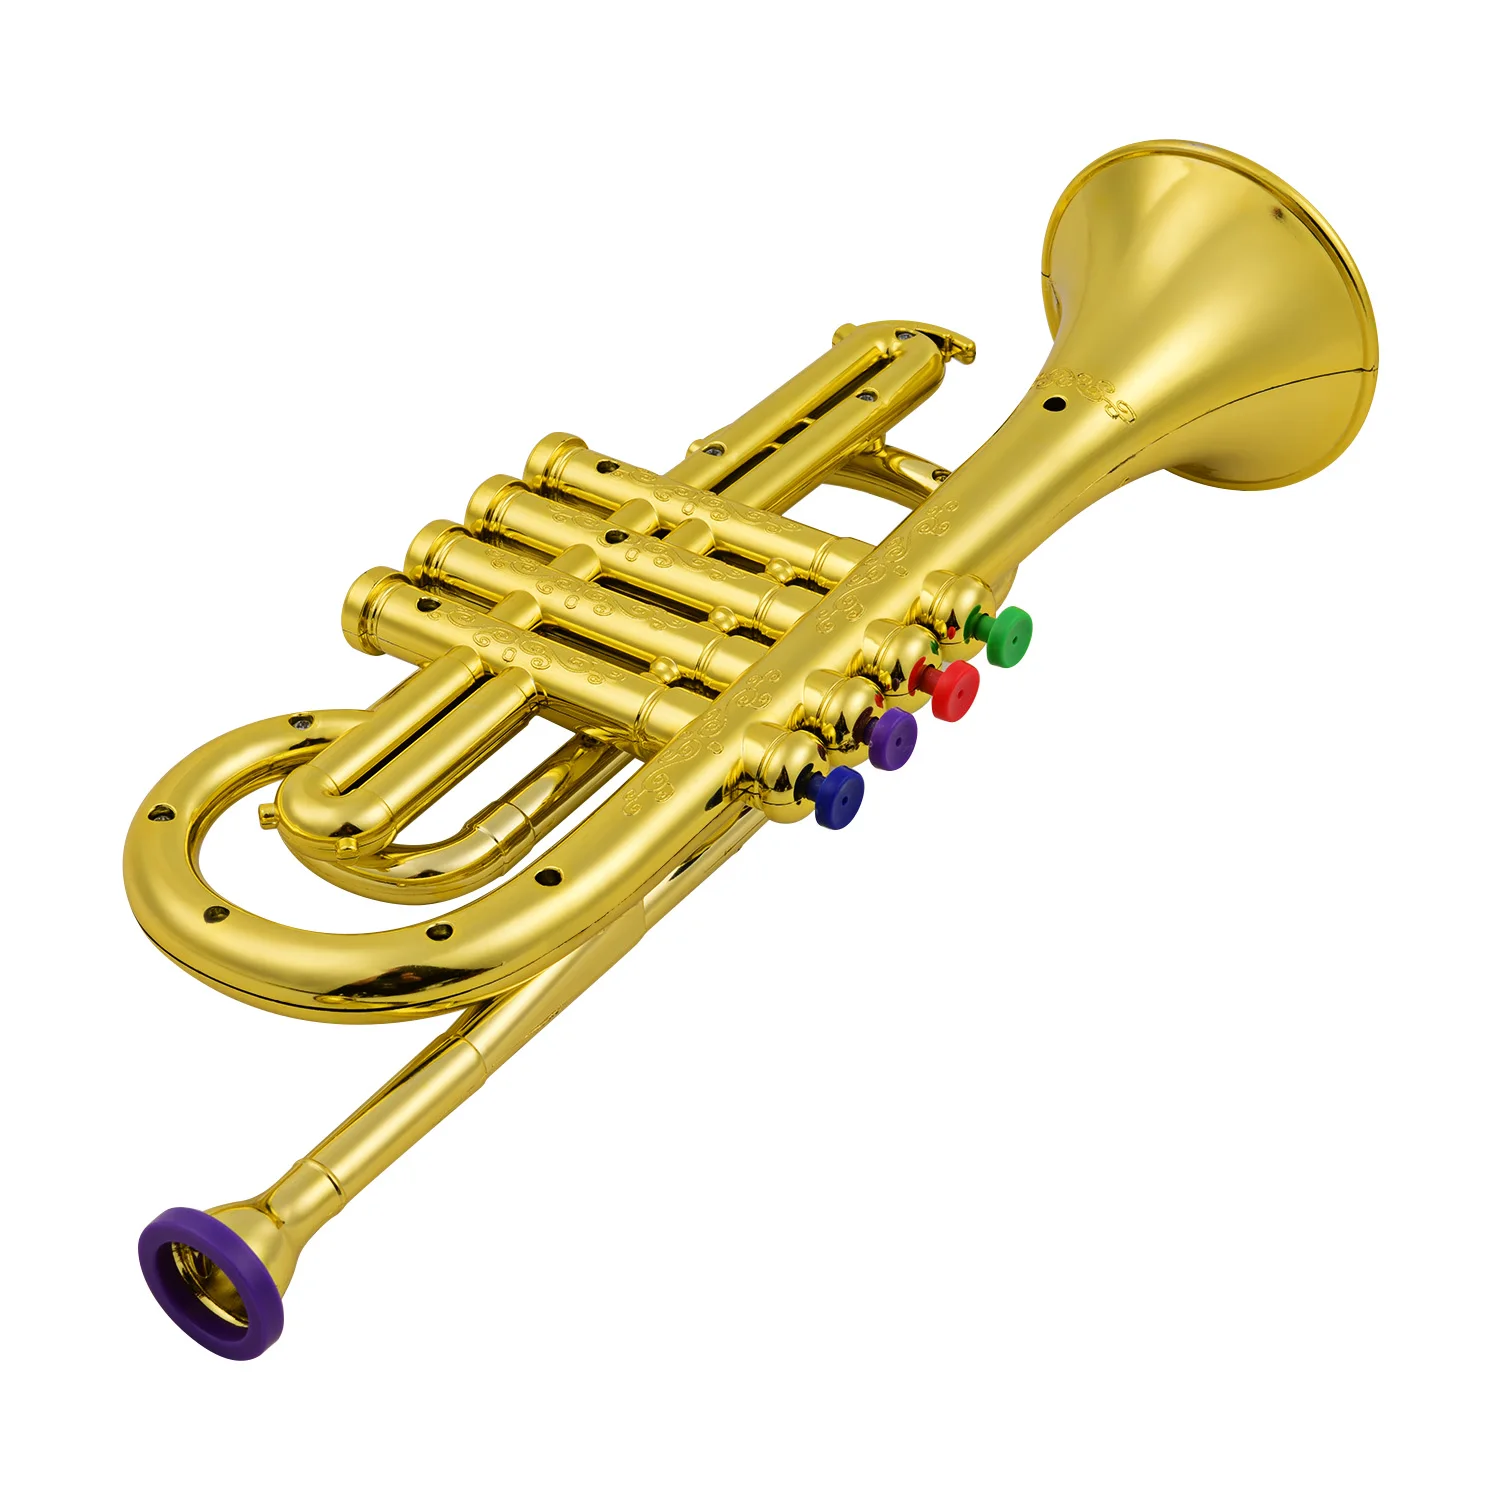 Multi-Color Trumpet Musical Children'S Toys Kids Toy Fun Musical Instrument LC 